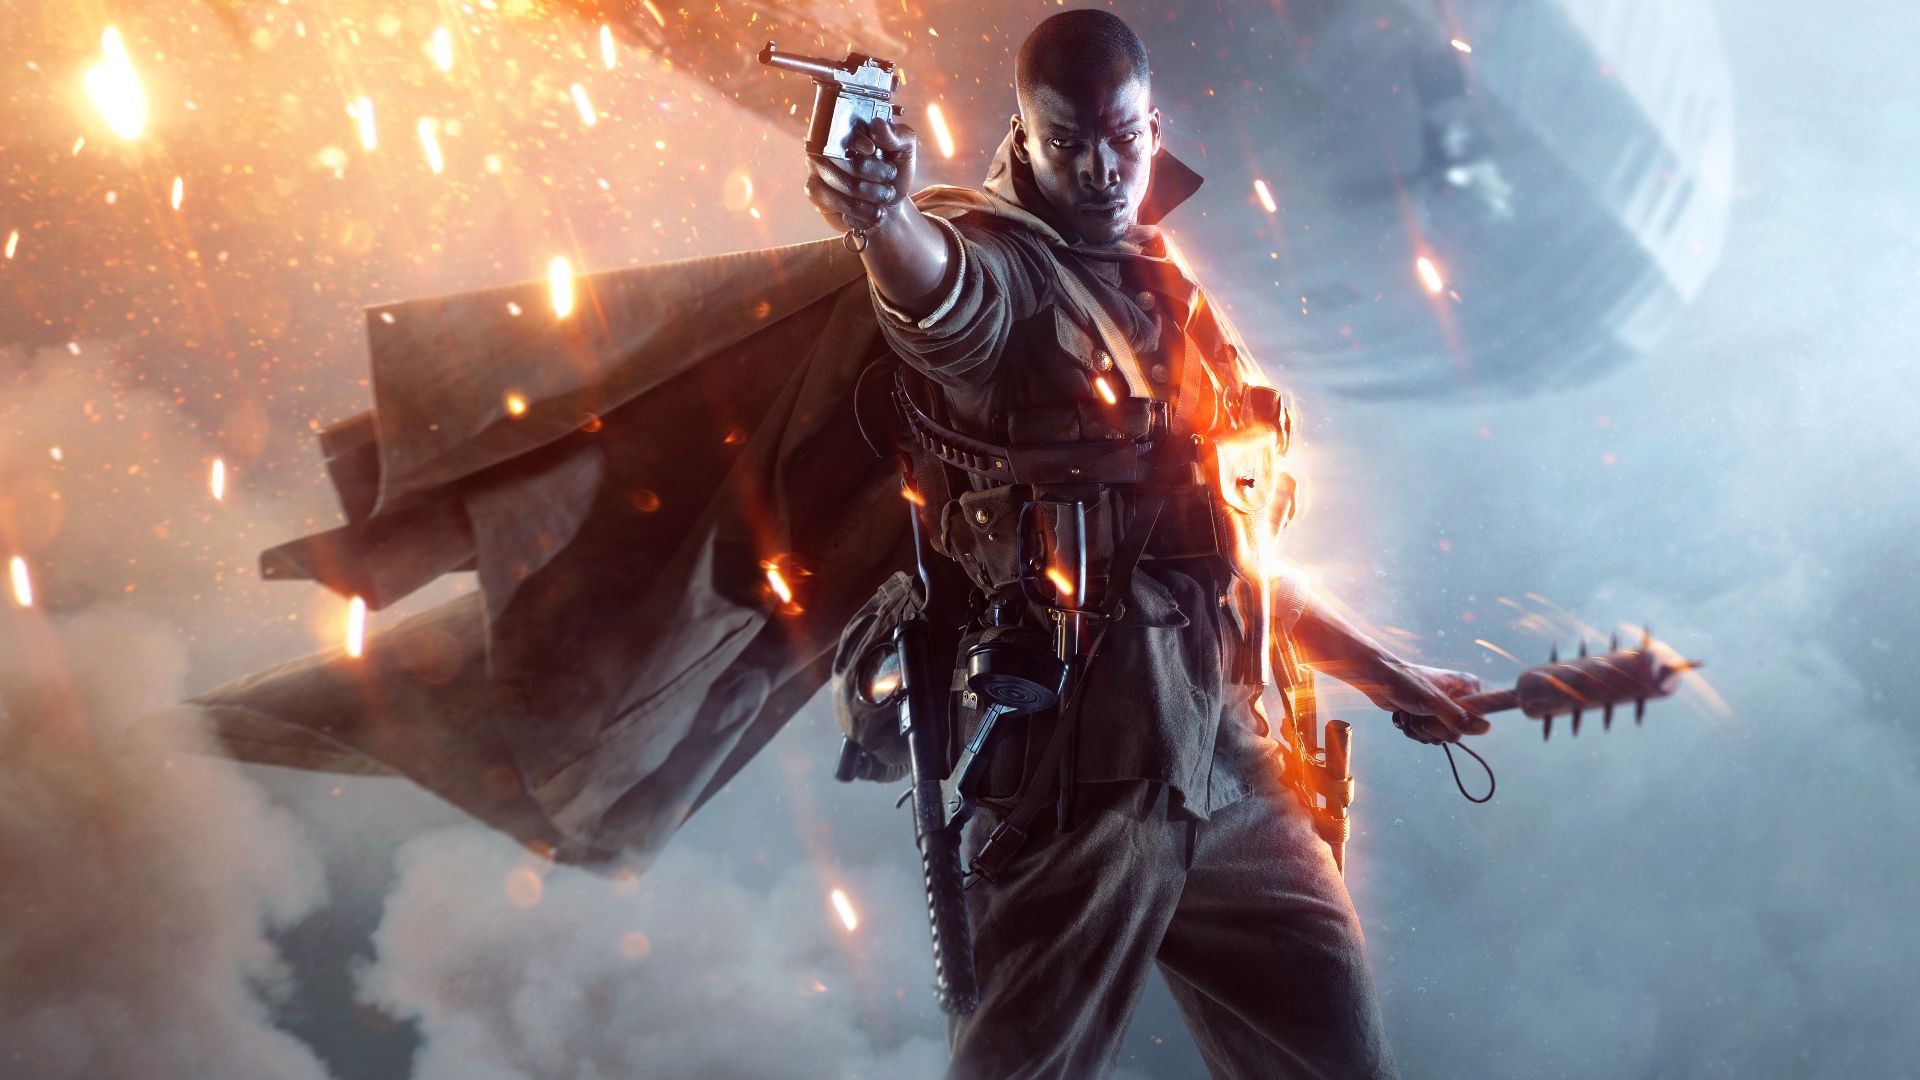 EA DICE may be developing a battle royale mode for Battlefield V -   News